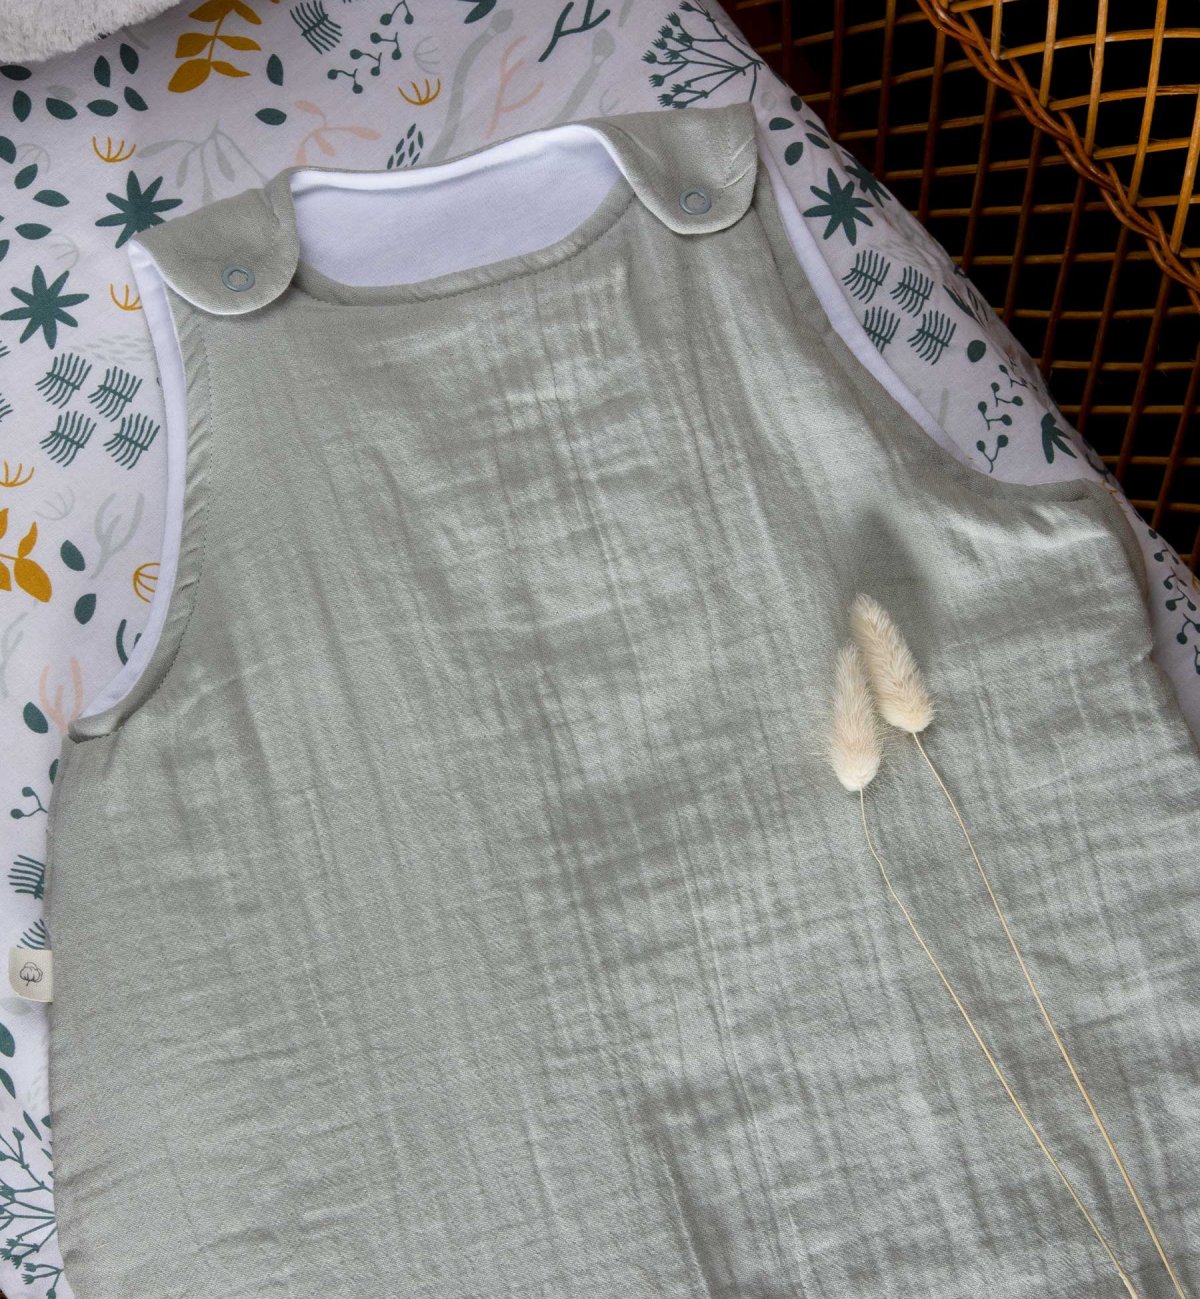 Summer sleeping bag in Organic Cotton gauze with matching pouch